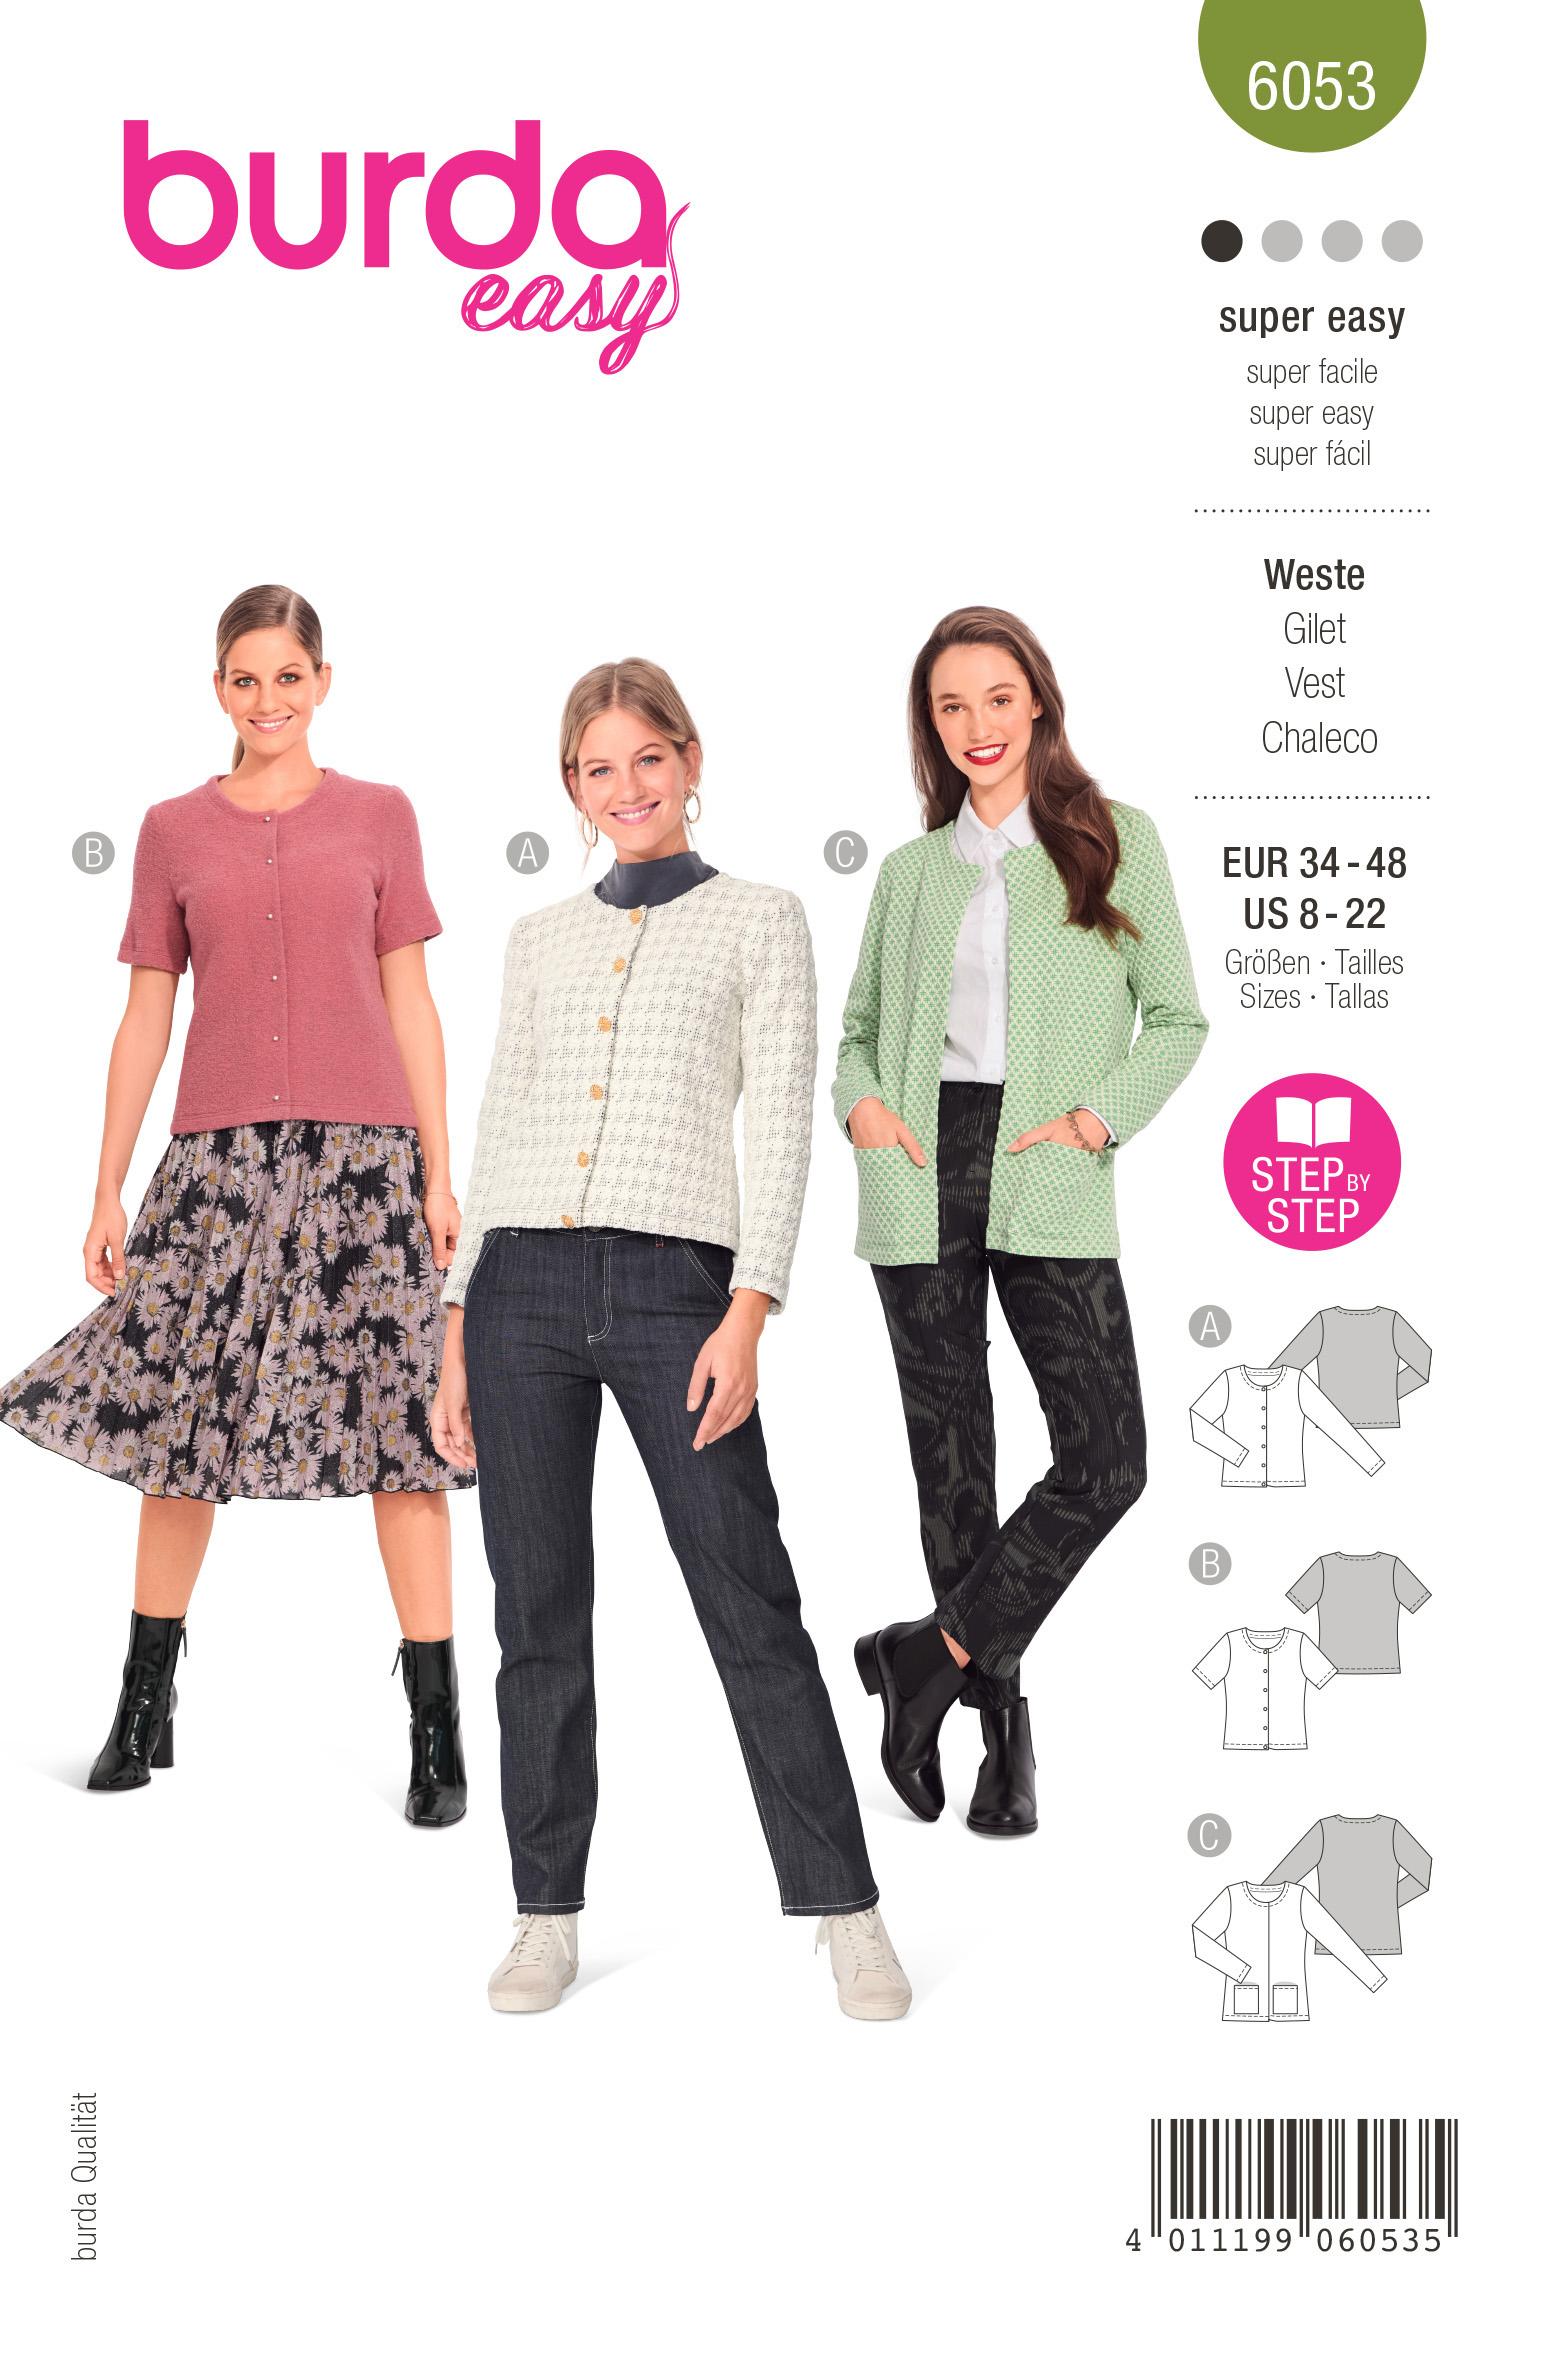 Burda Style Pattern 6053 Misses' Cardigan with Rounded Neckline